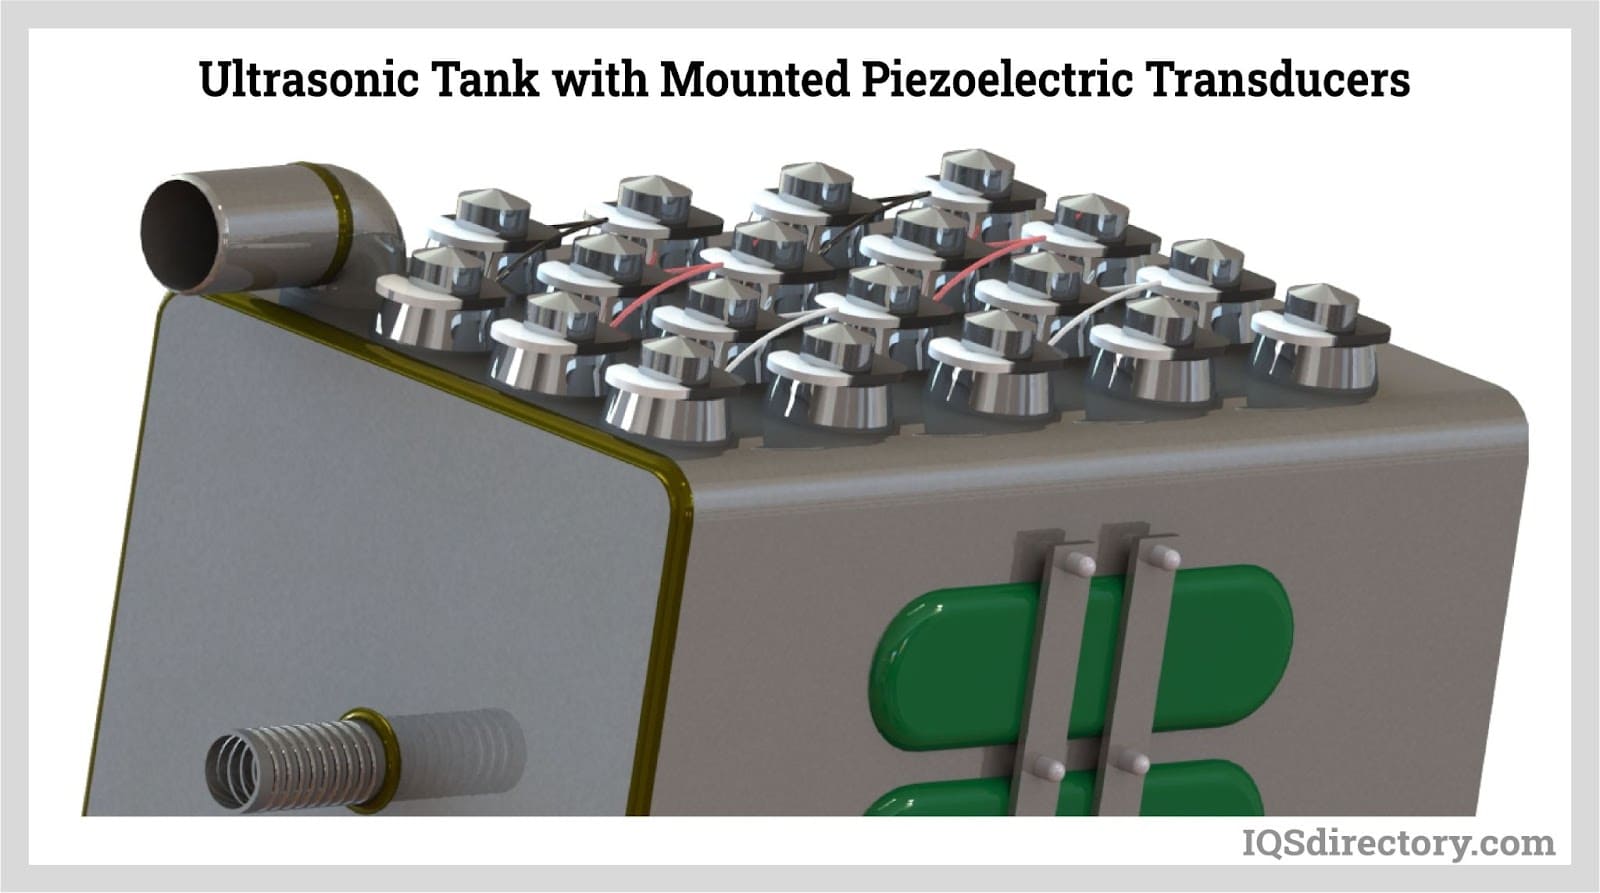 Ultrasonic Tank with Mounted Piezoelectric Transducers